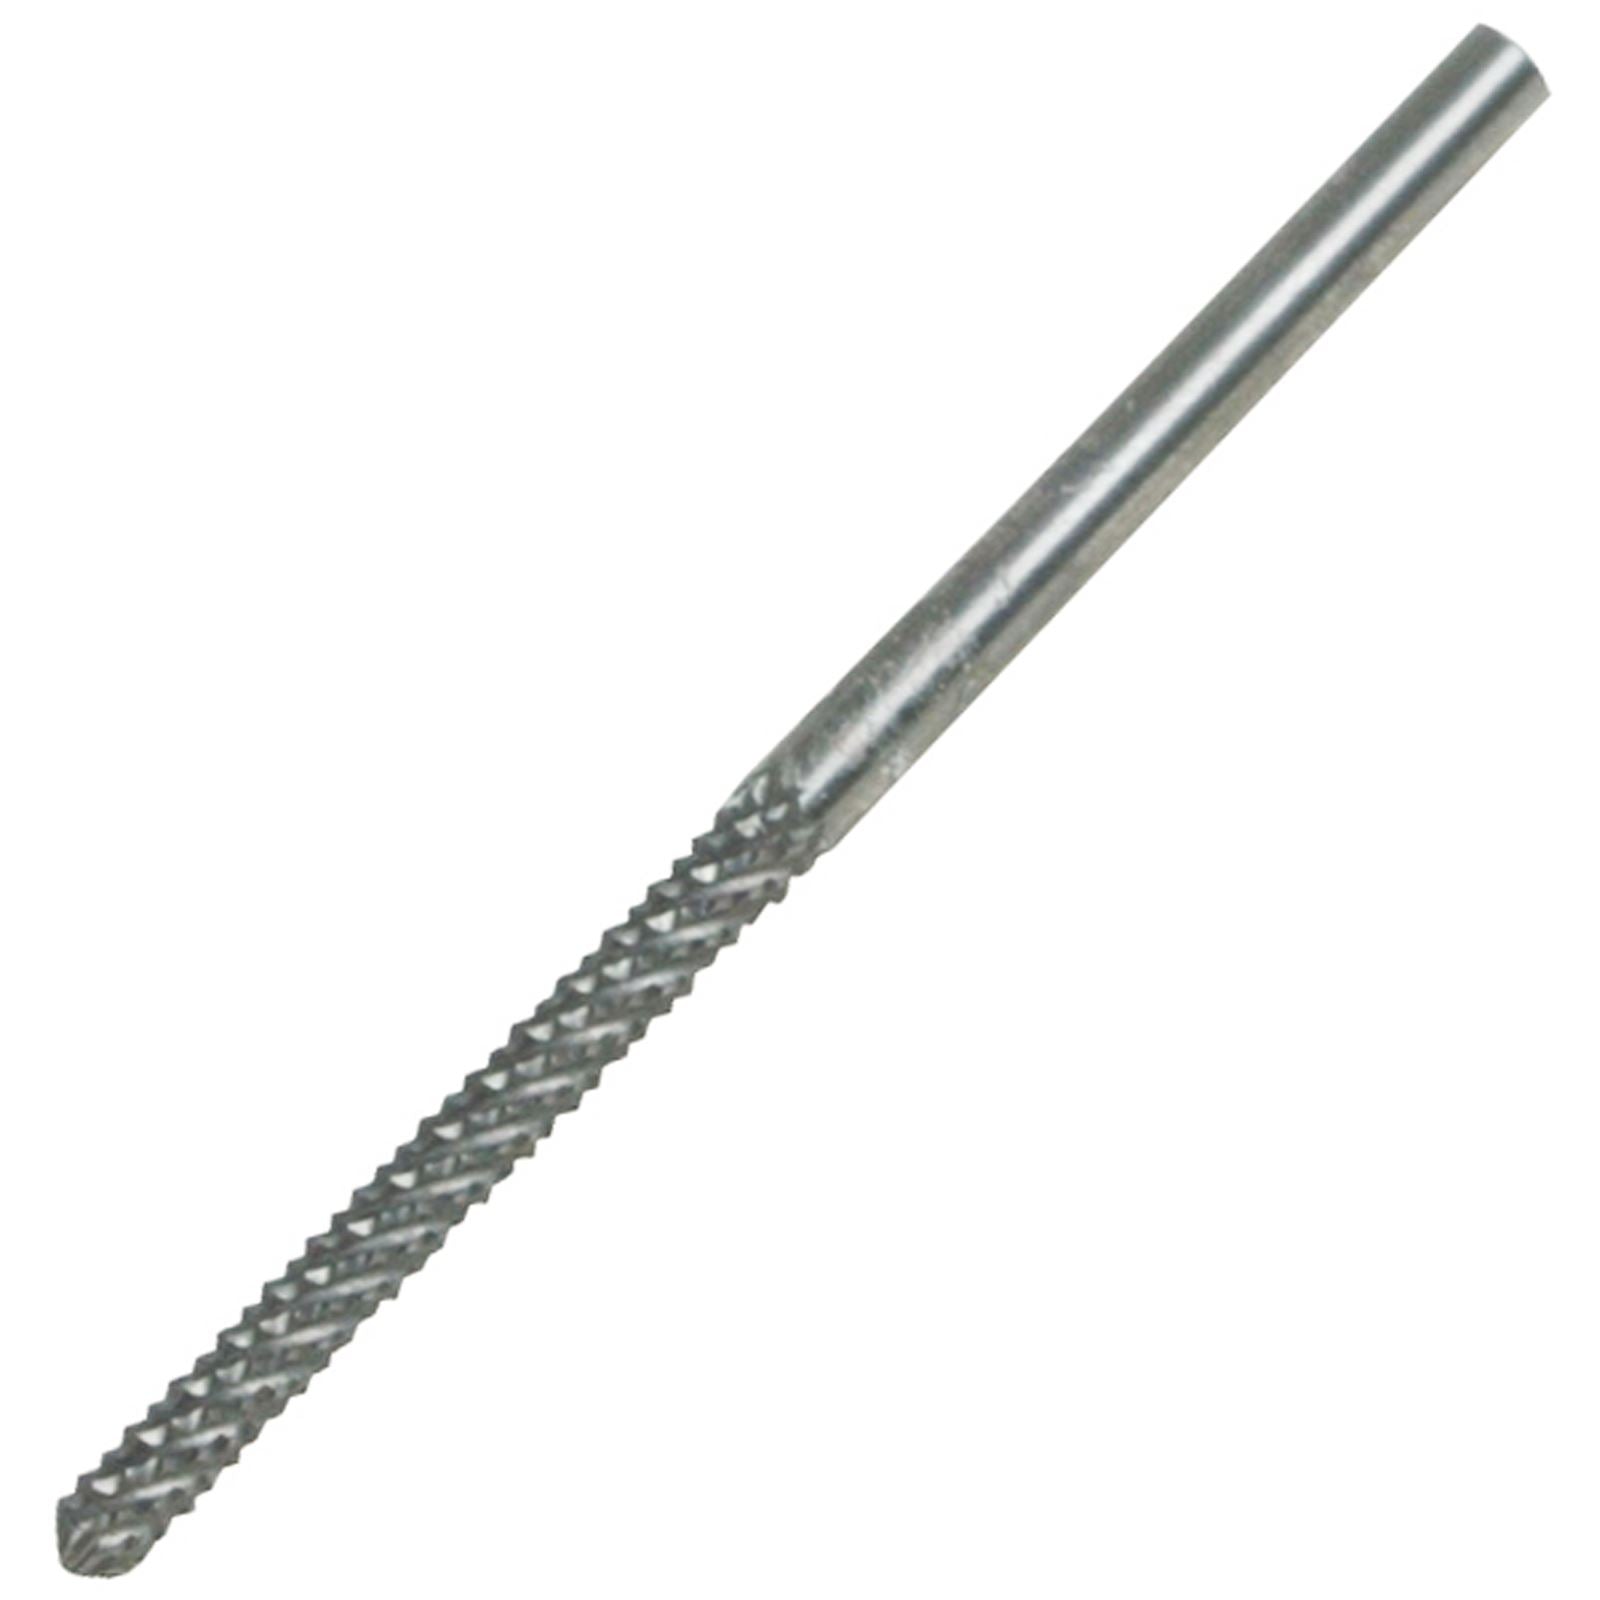 Silverline 1/8" Tile Cutting Spiral Saw Bit Ceramic Cement Marble Rotary